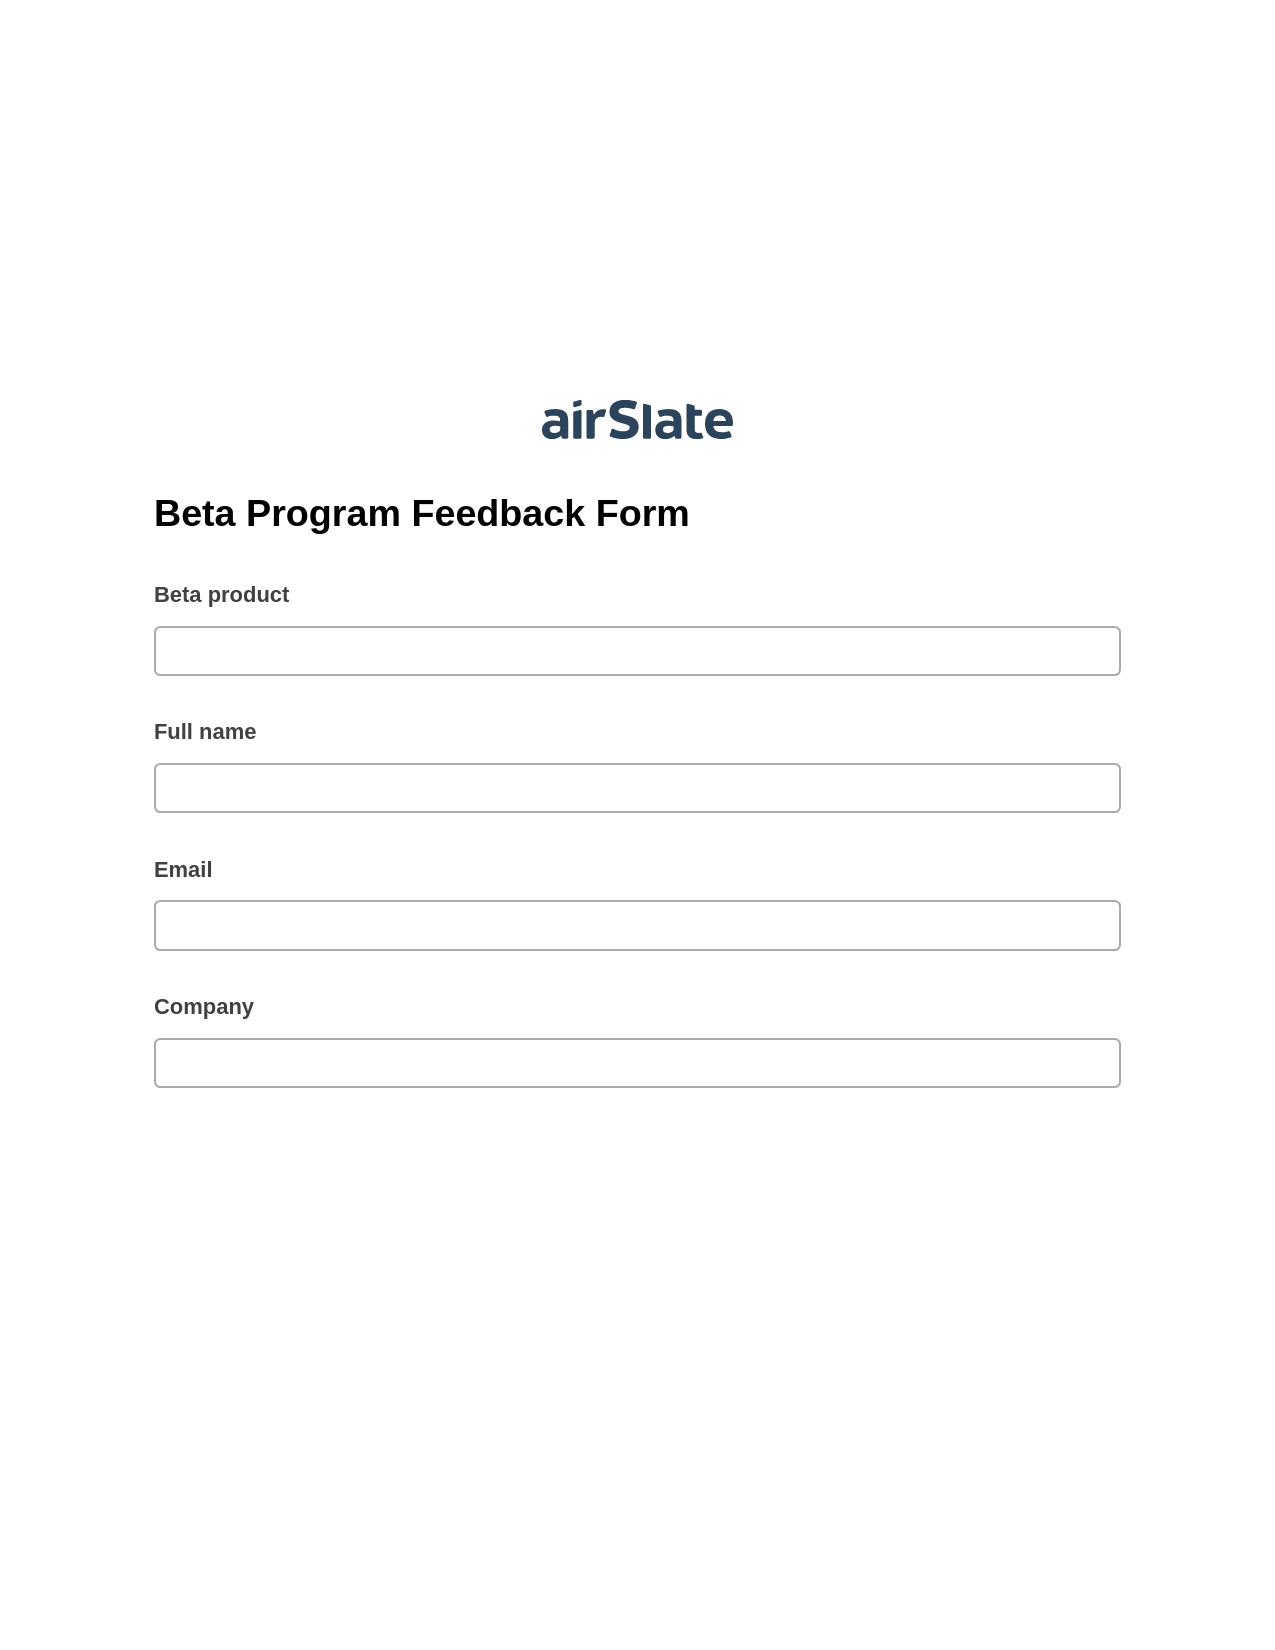 Multirole Beta Program Feedback Form Pre-fill Slate from MS Dynamics 365 Records Bot, Remove Tags From Slate Bot, Dropbox Bot